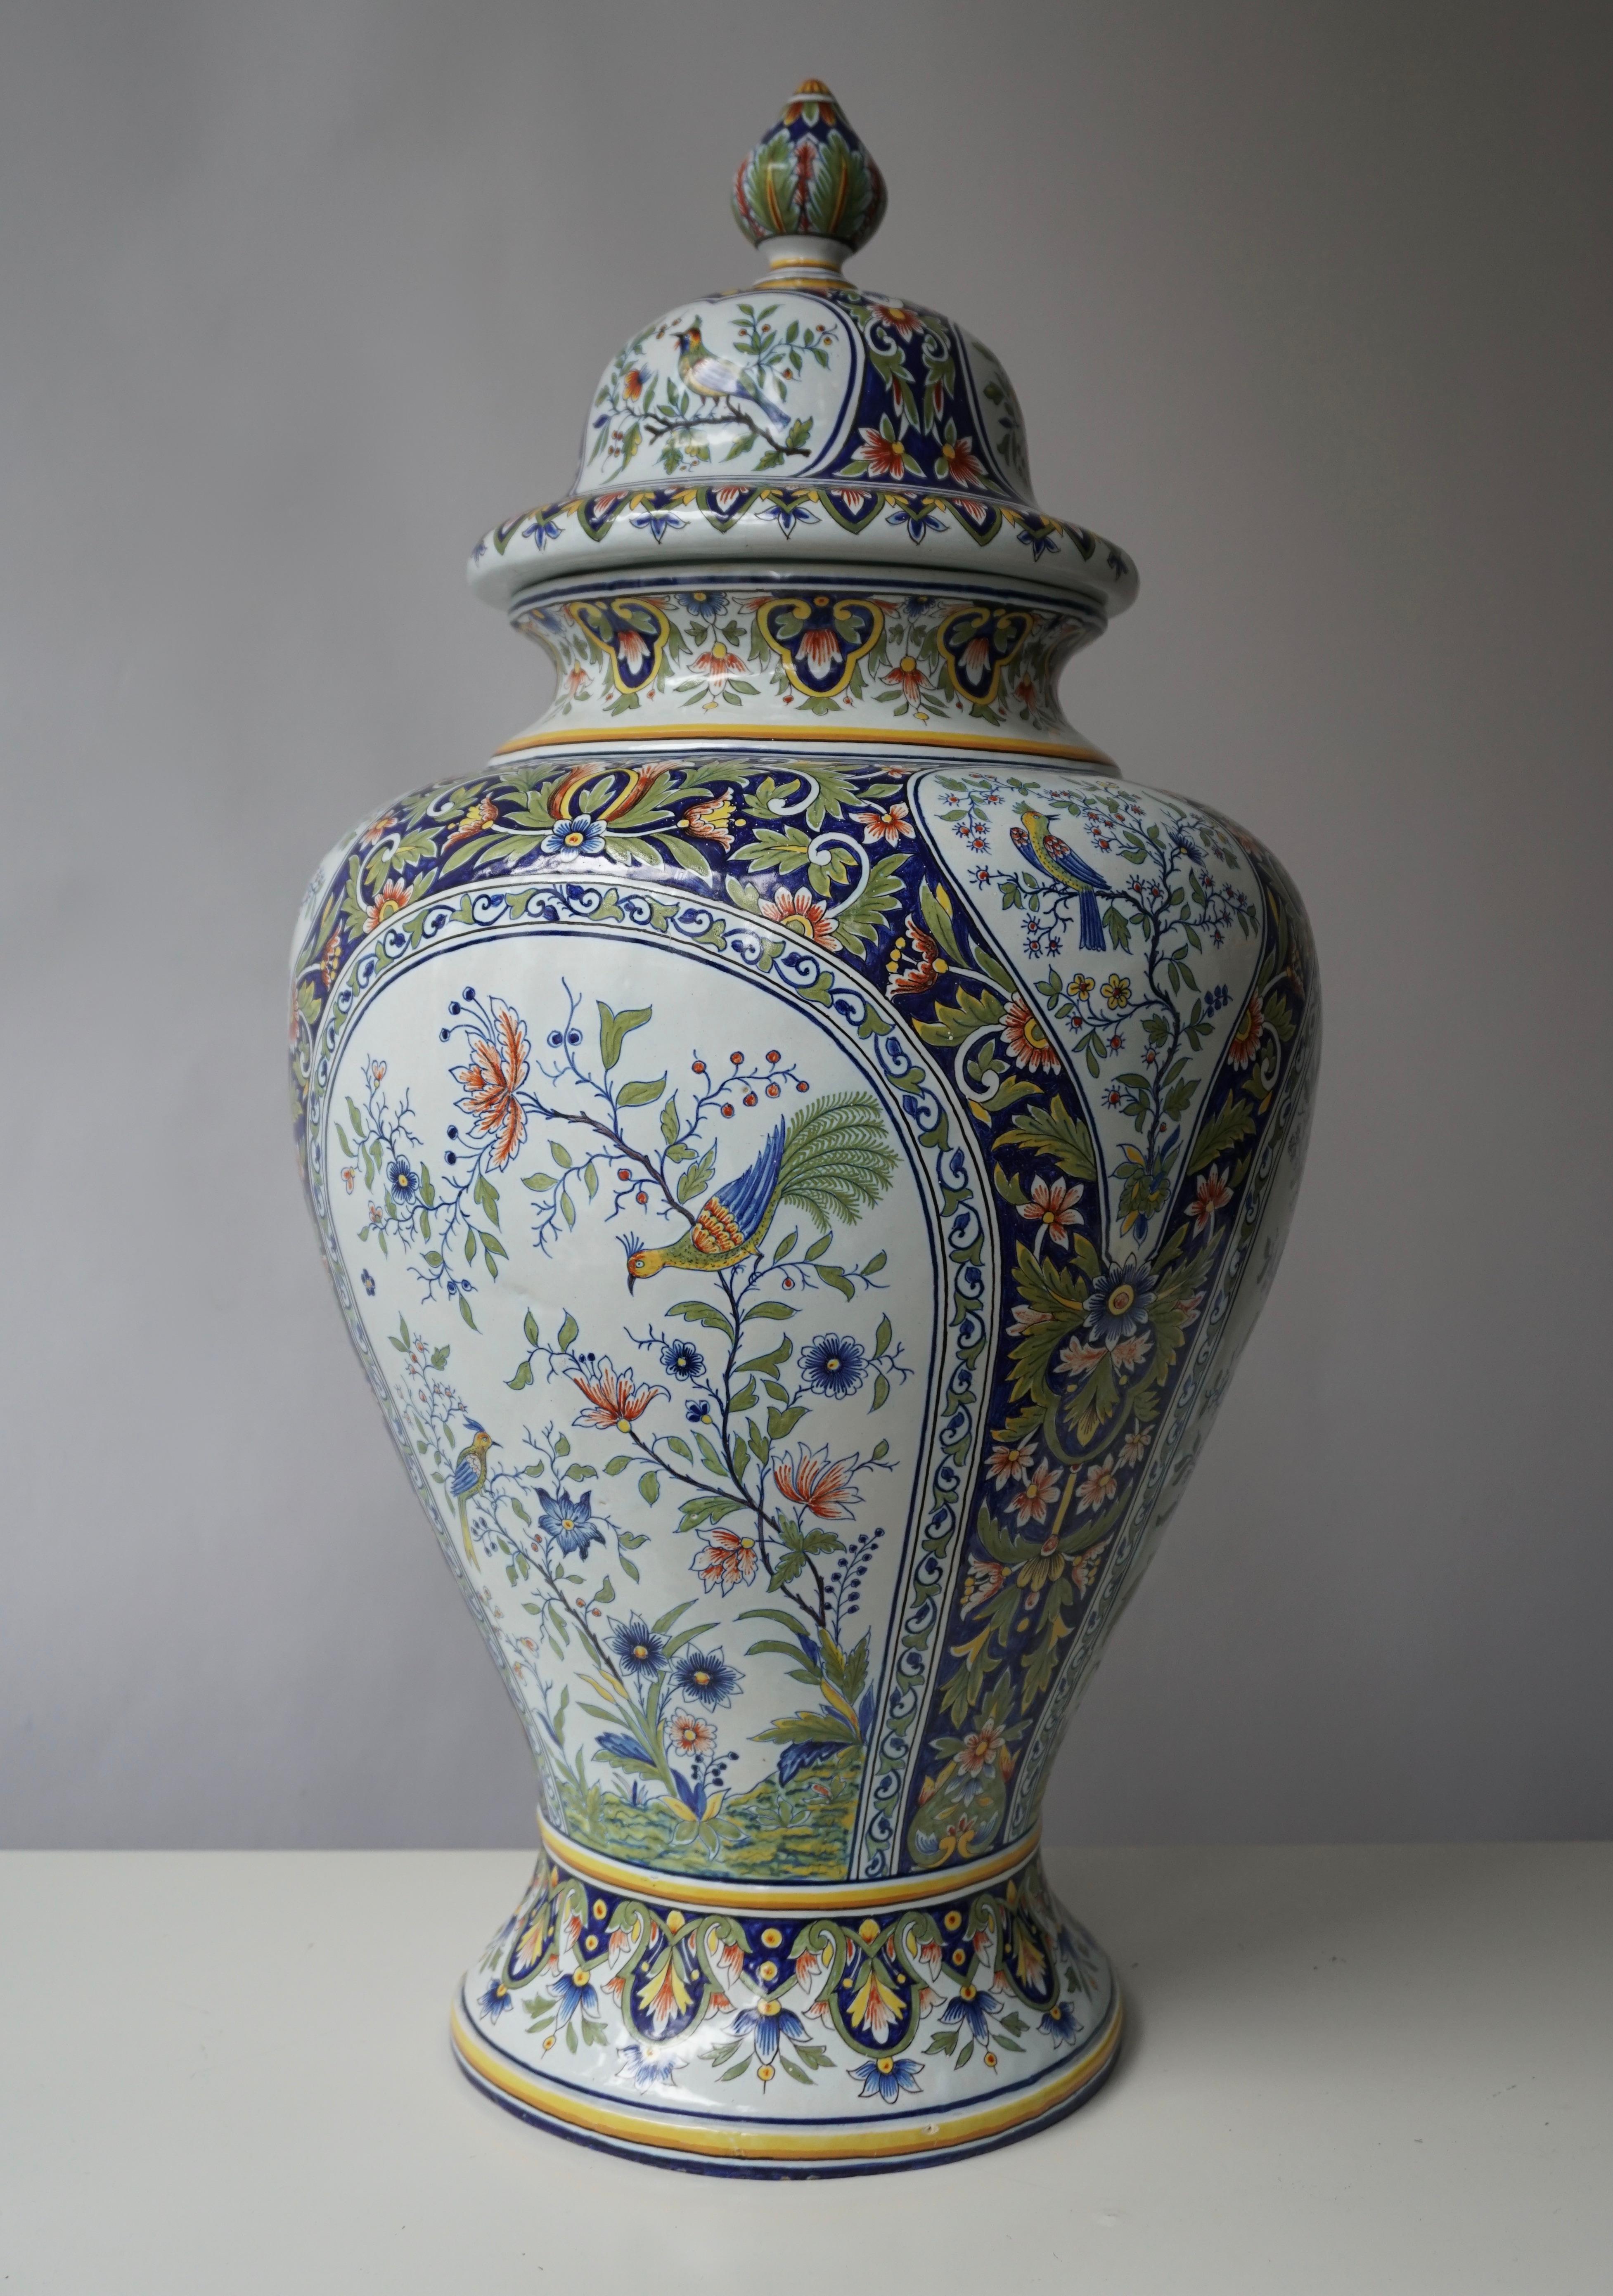 Hand-Painted French Hand Painted Faience Urn or Vase with Flowers and Birds Motifs